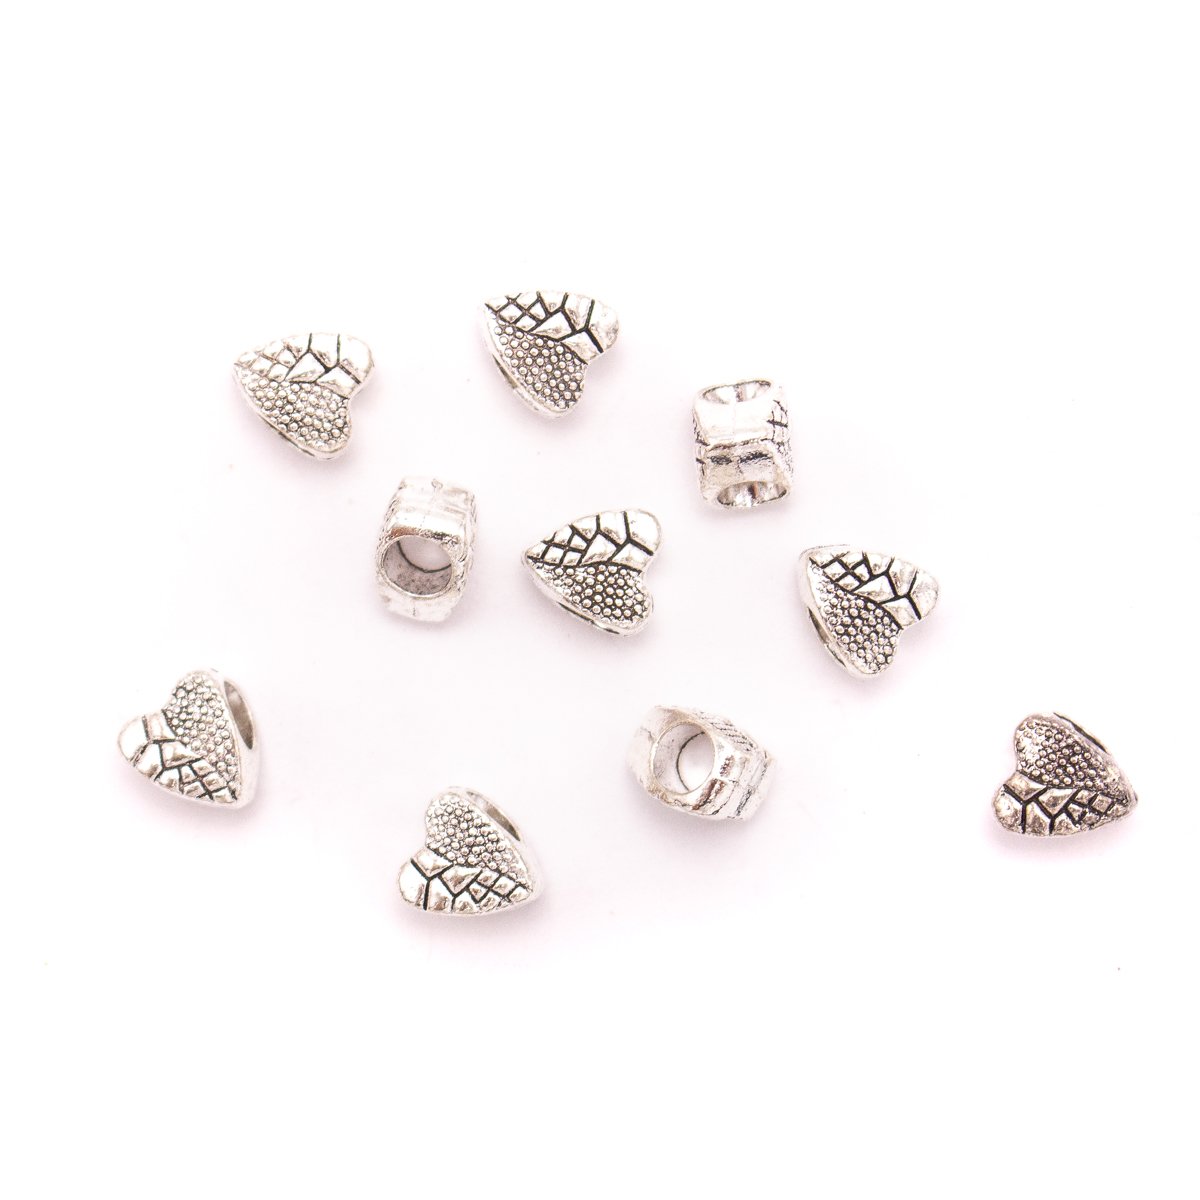 20PCS For 5mm leather antique silver zamak 5mm round heart beads Jewelry supply Findings Components- D-5-5-152